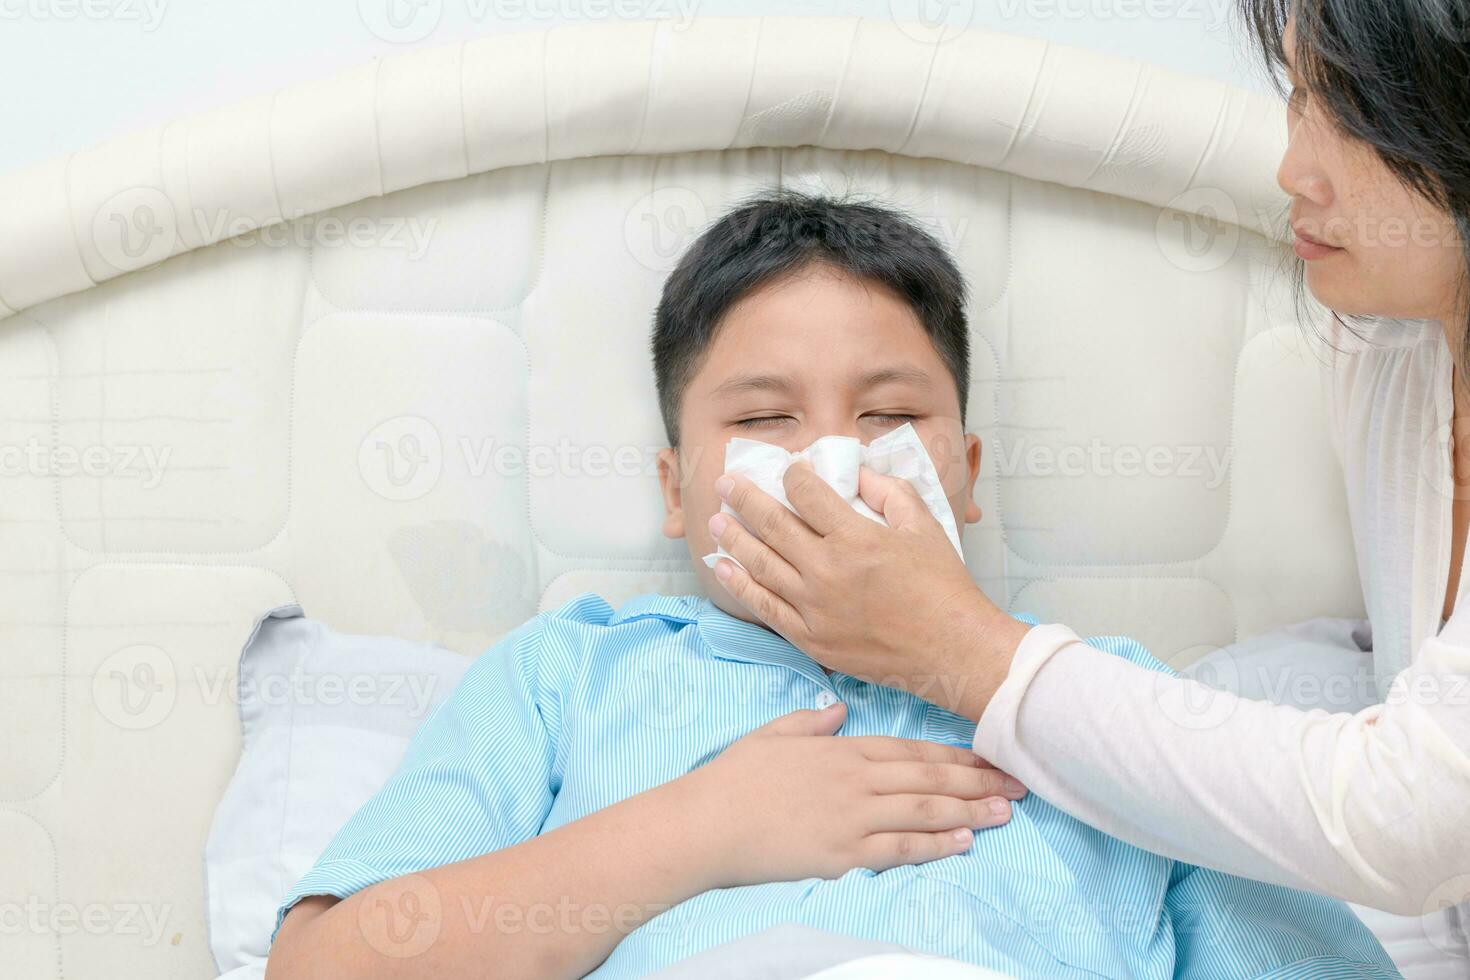 Sick asian child wiping or cleaning nose with tissue photo